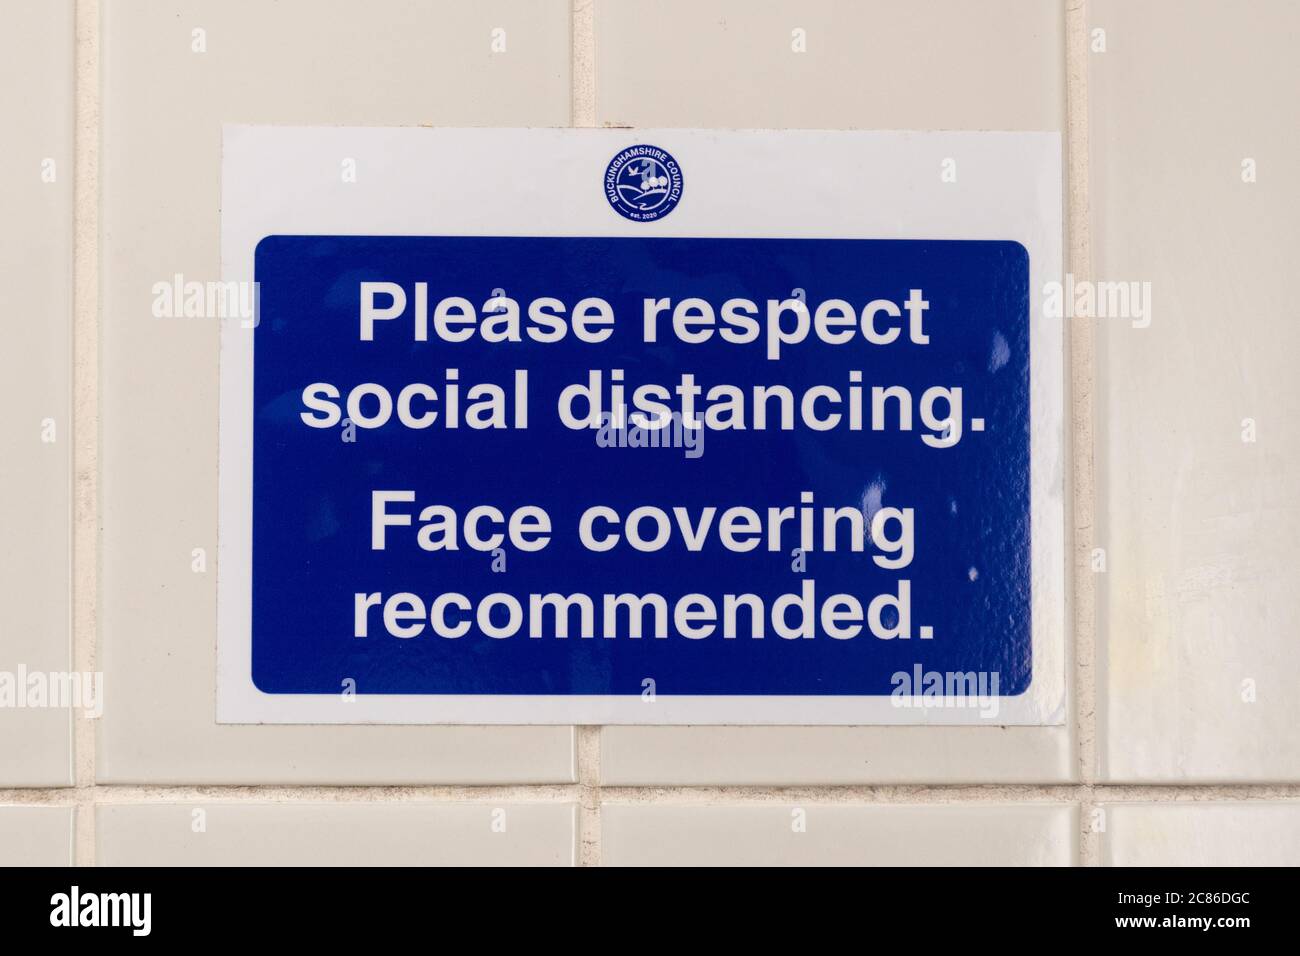 Notice on the wall in a public toilet to Please respect social distancing, face covering recommended, during 2020 coronavirus covid-19 pandemic Stock Photo